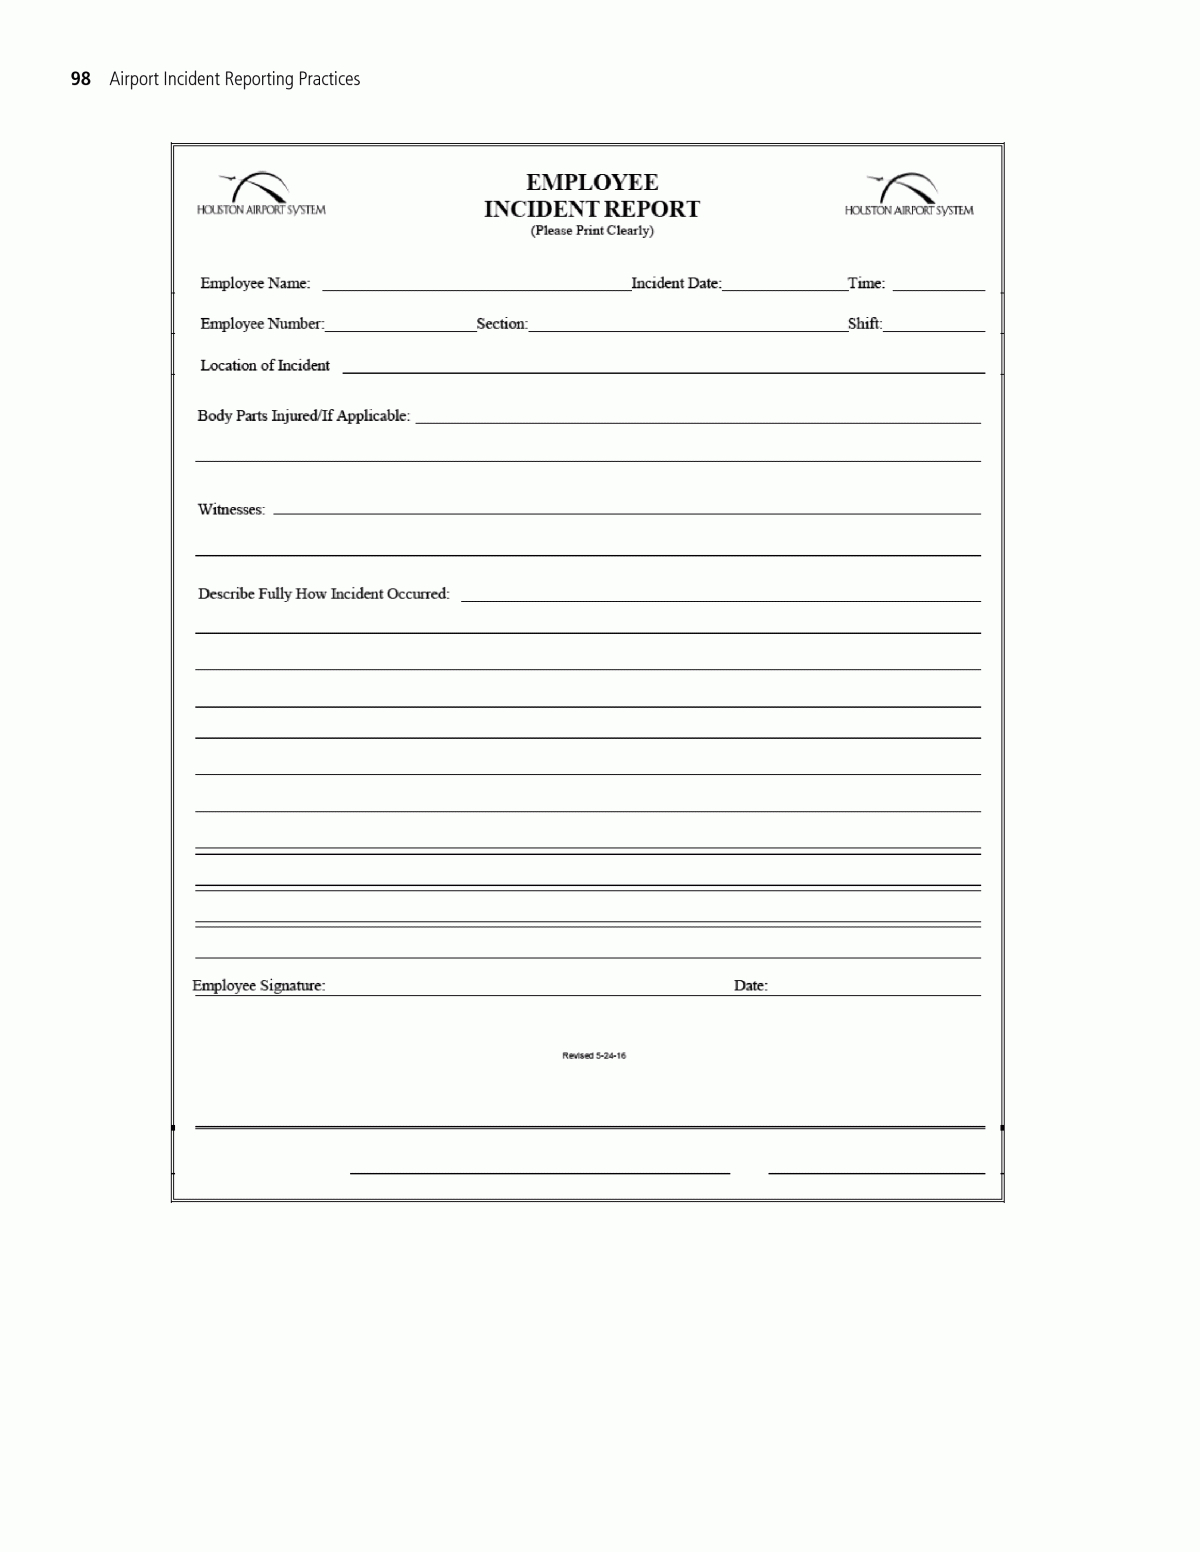 Appendix H – Sample Employee Incident Report Form | Airport Pertaining To Incident Summary Report Template